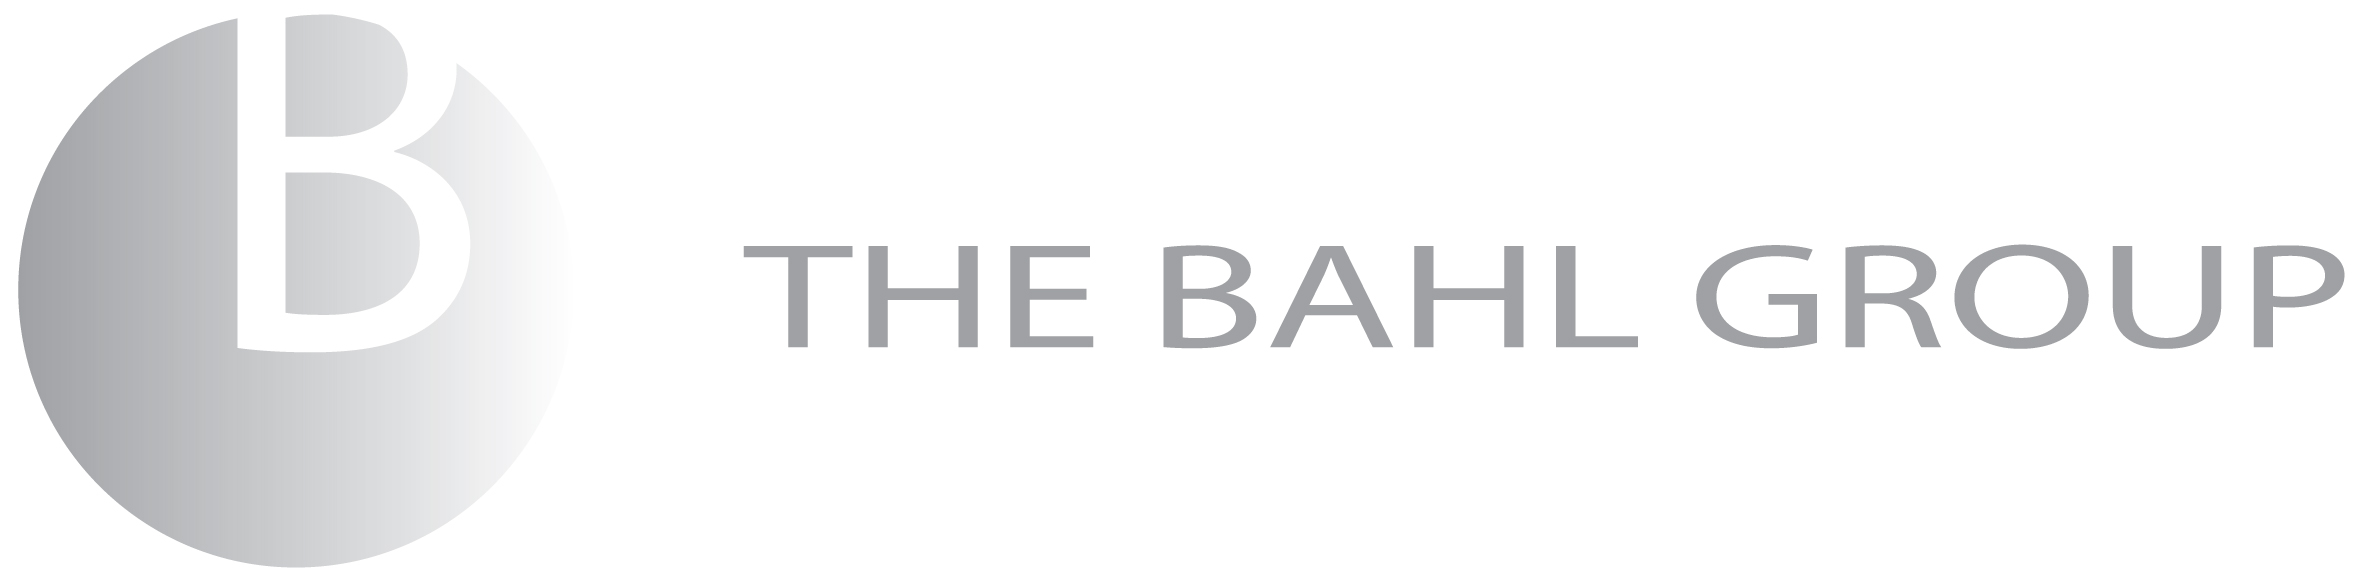 The Bahl Group